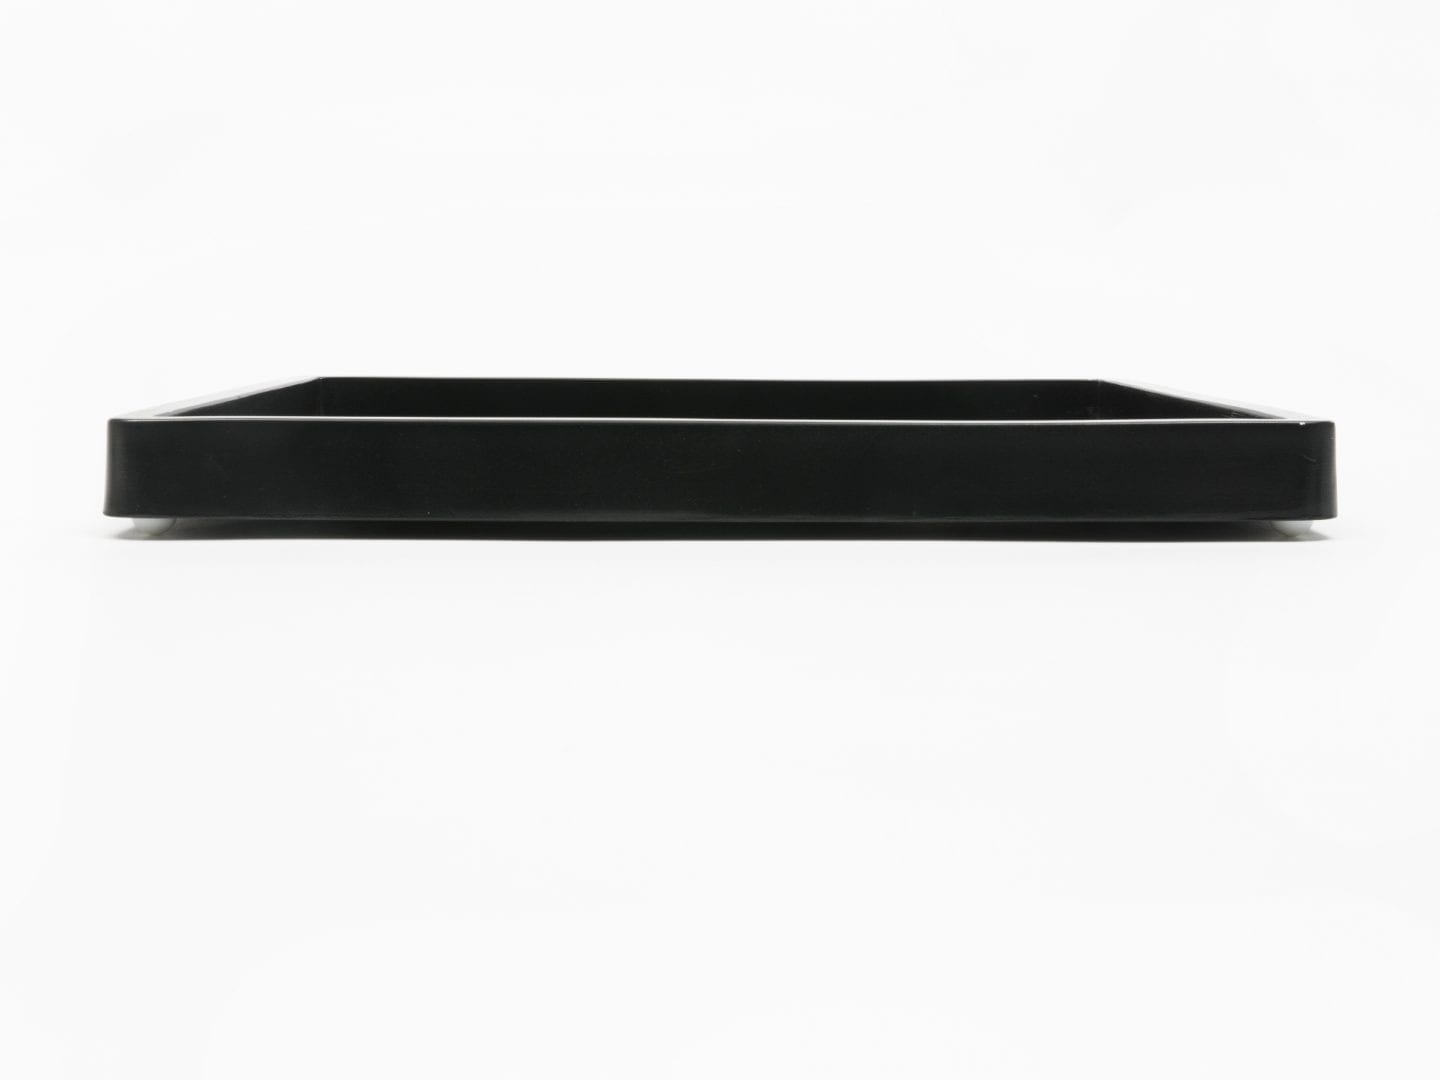 Small Work-Play Tray, Black 17 x 11.75 Inches